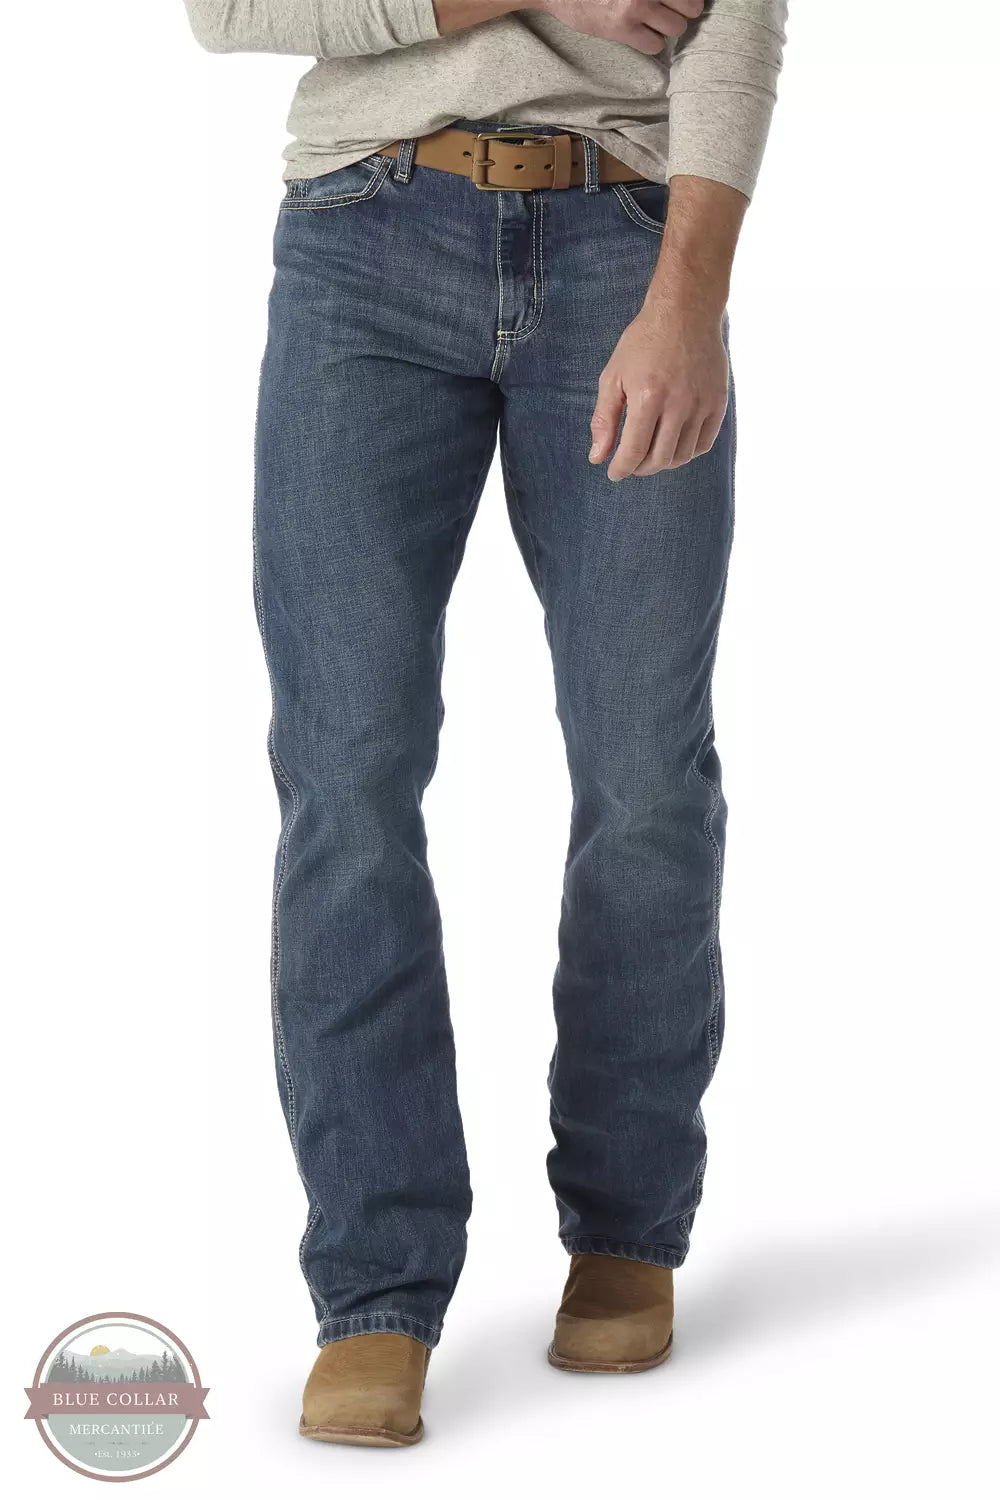 Wrangler WRT20RT Retro® Relaxed Fit Bootcut Jeans in Rocky Top Front View